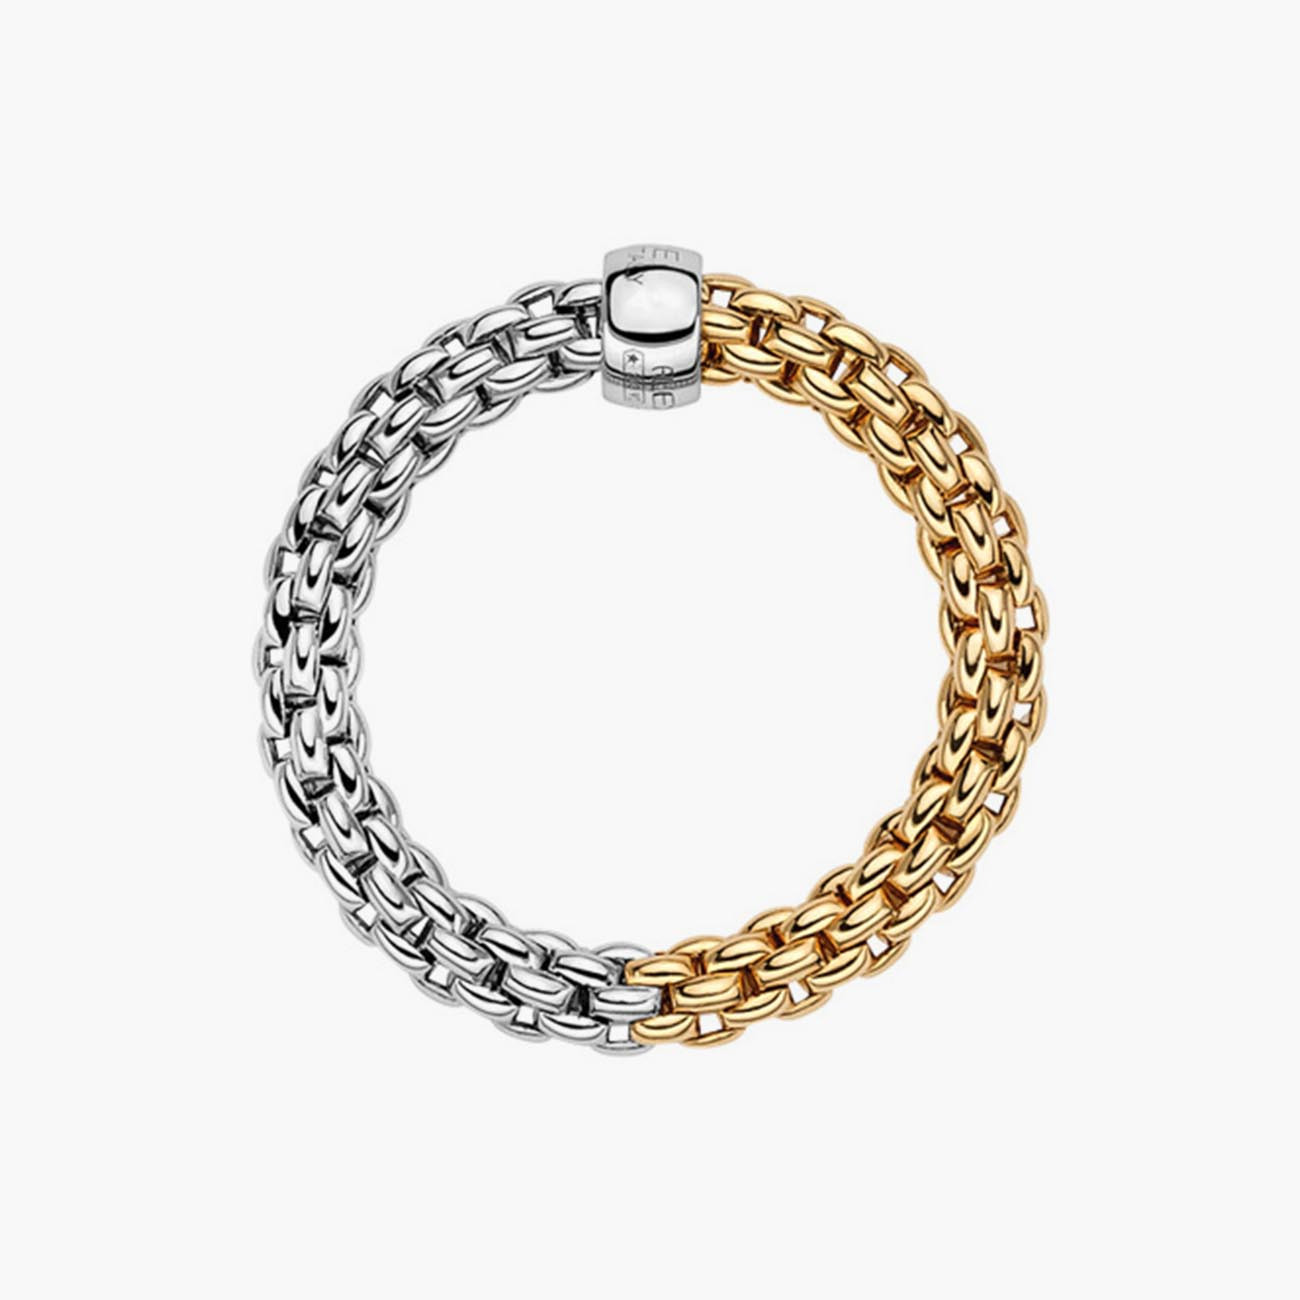 Fope Essentials Ring in White and Yellow Gold Profile